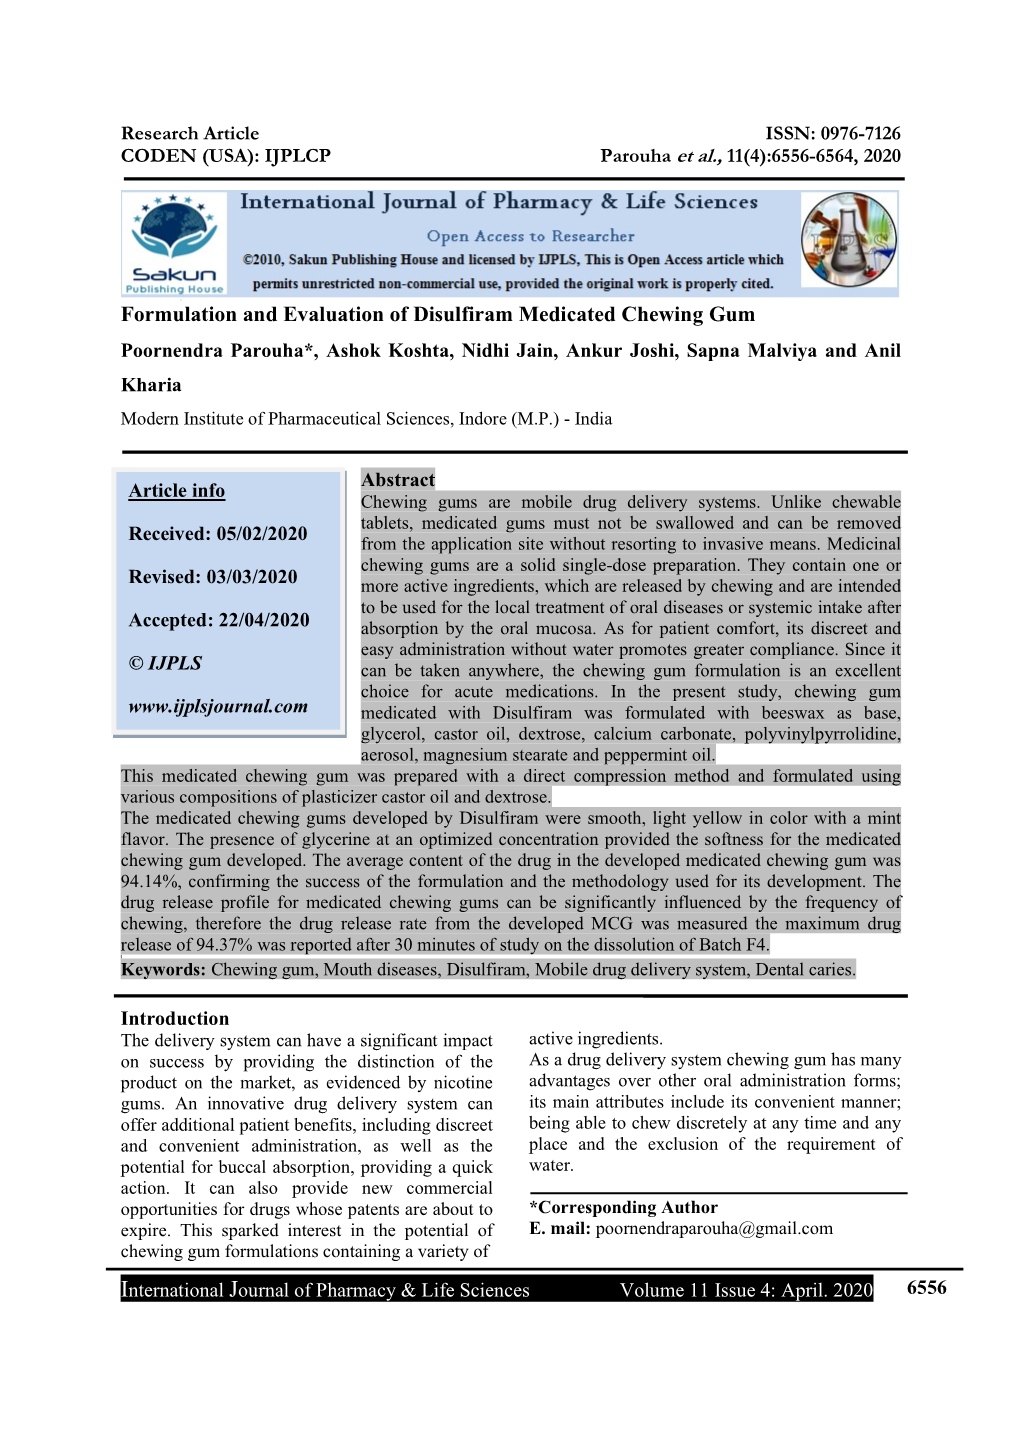 Formulation and Evaluation of Disulfiram Medicated Chewing